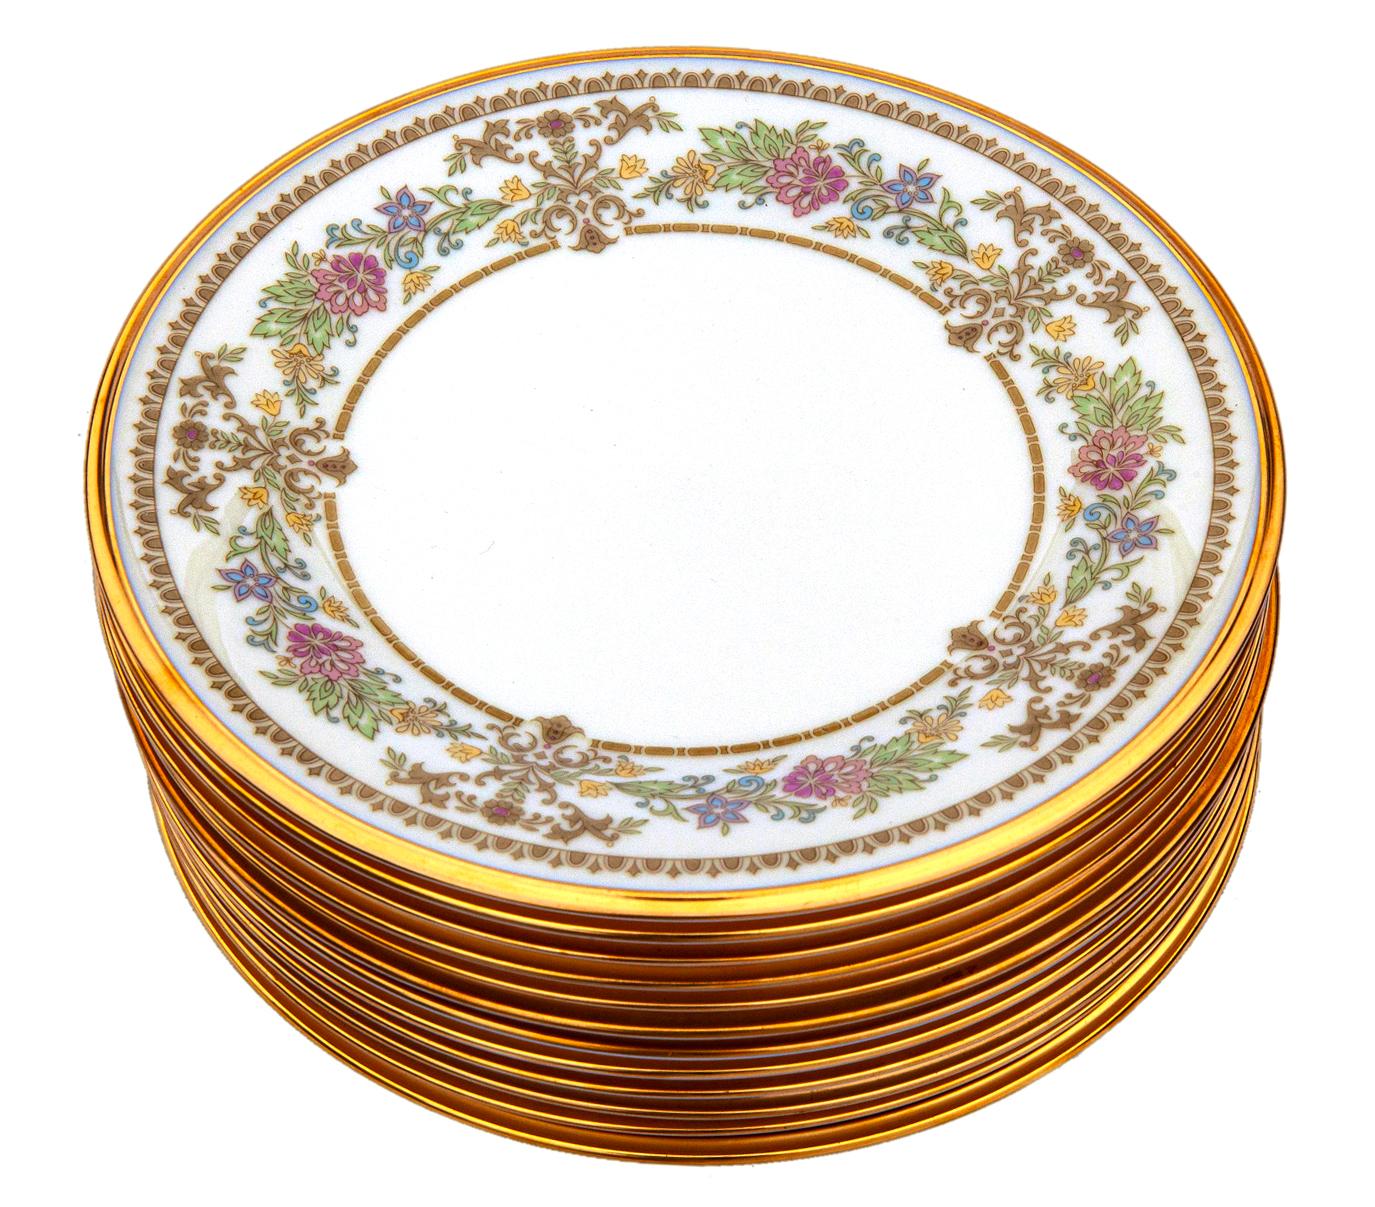 Classic Lenox China pattern “castle garden” from the 1970's in shades of pink, yellow, green on ivory background. 
This stunning pattern has since been discontinued by Lenox.
Gold band border on the rim. Just stunning. In perfect condition. 
